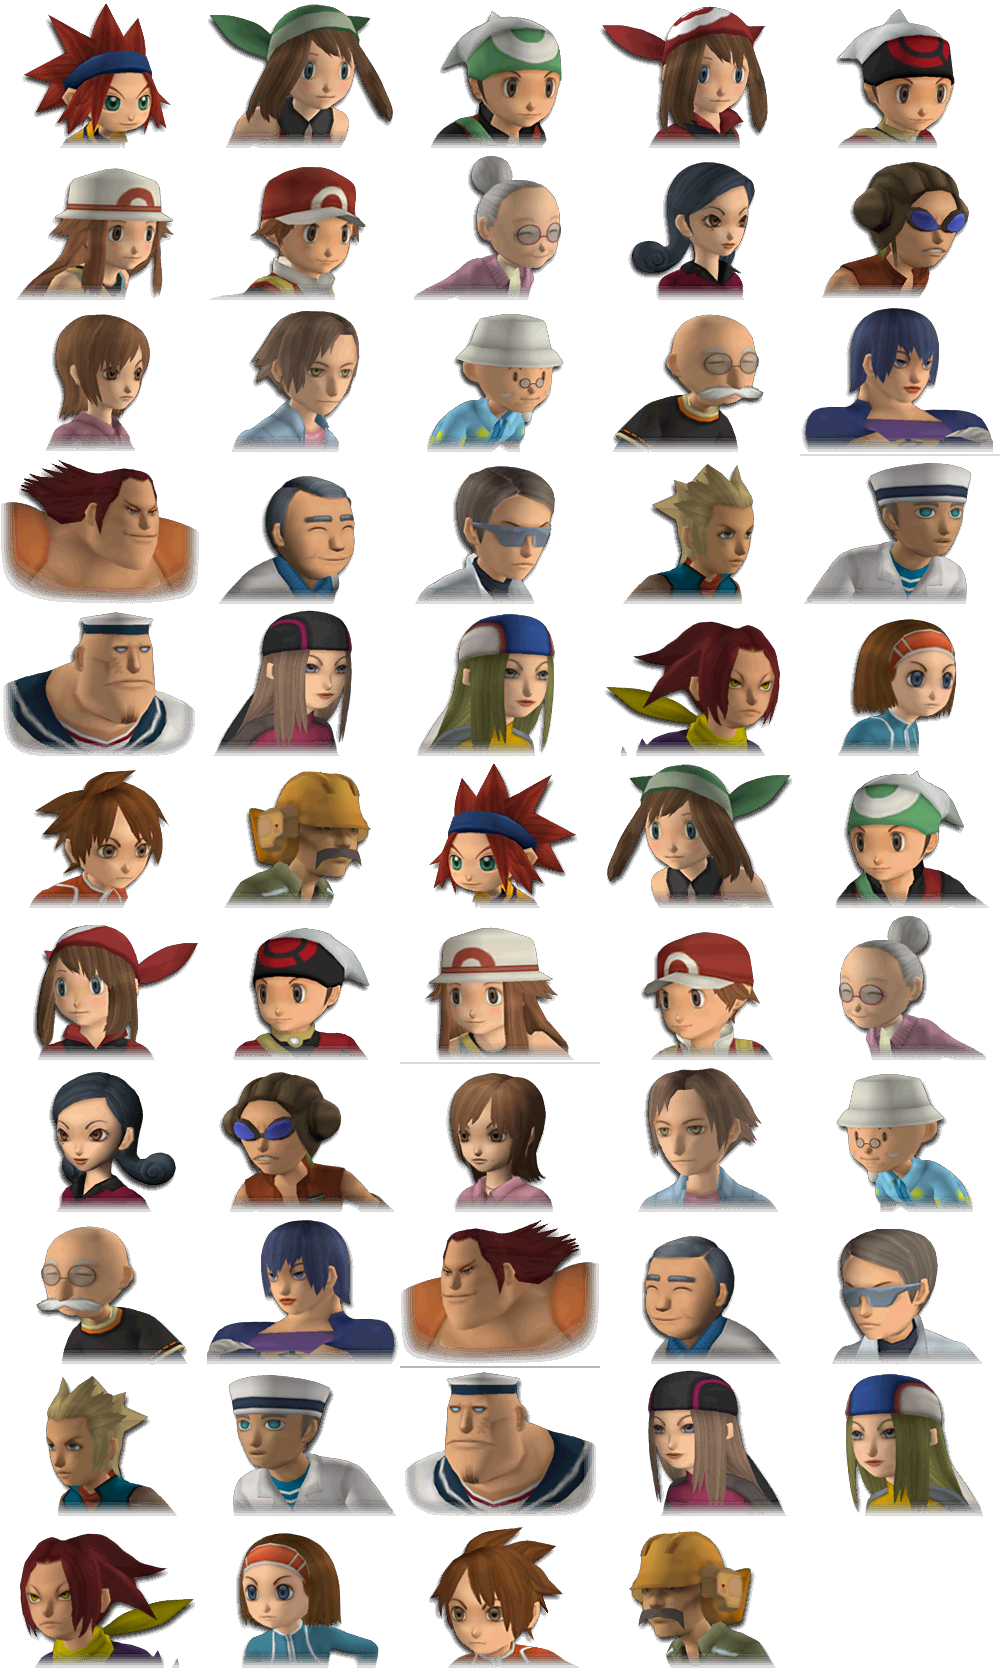 Pokémon XD: Gale of Darkness - Character Icons